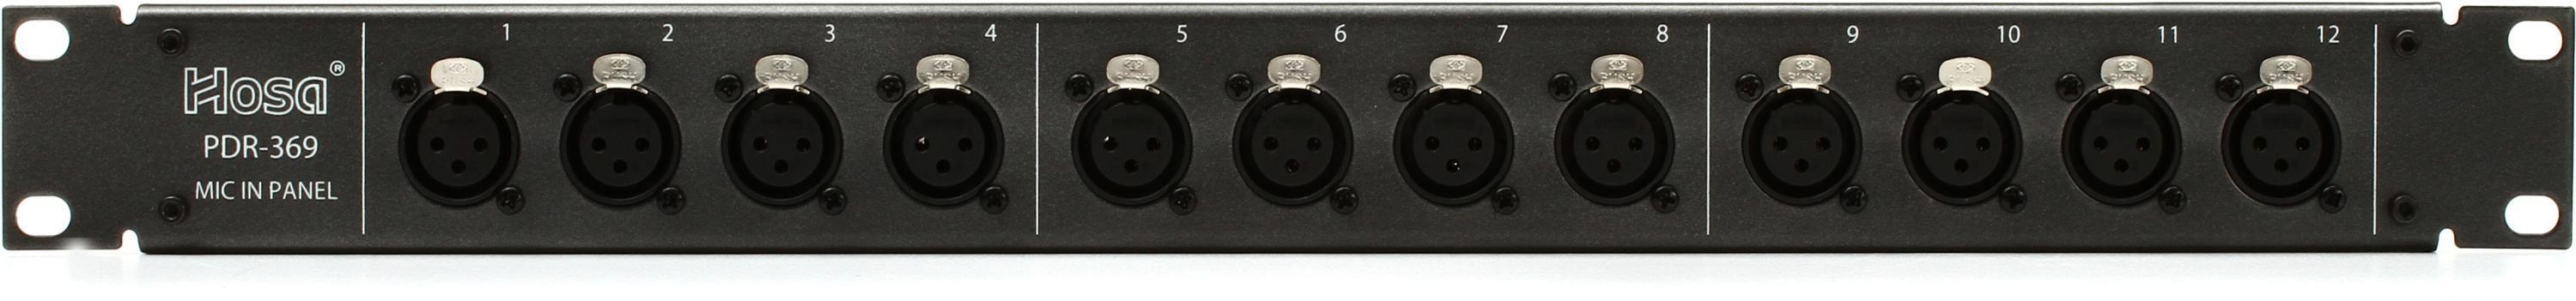 Hosa PDR-369 12-point XLR Balanced Patchbay Sweetwater